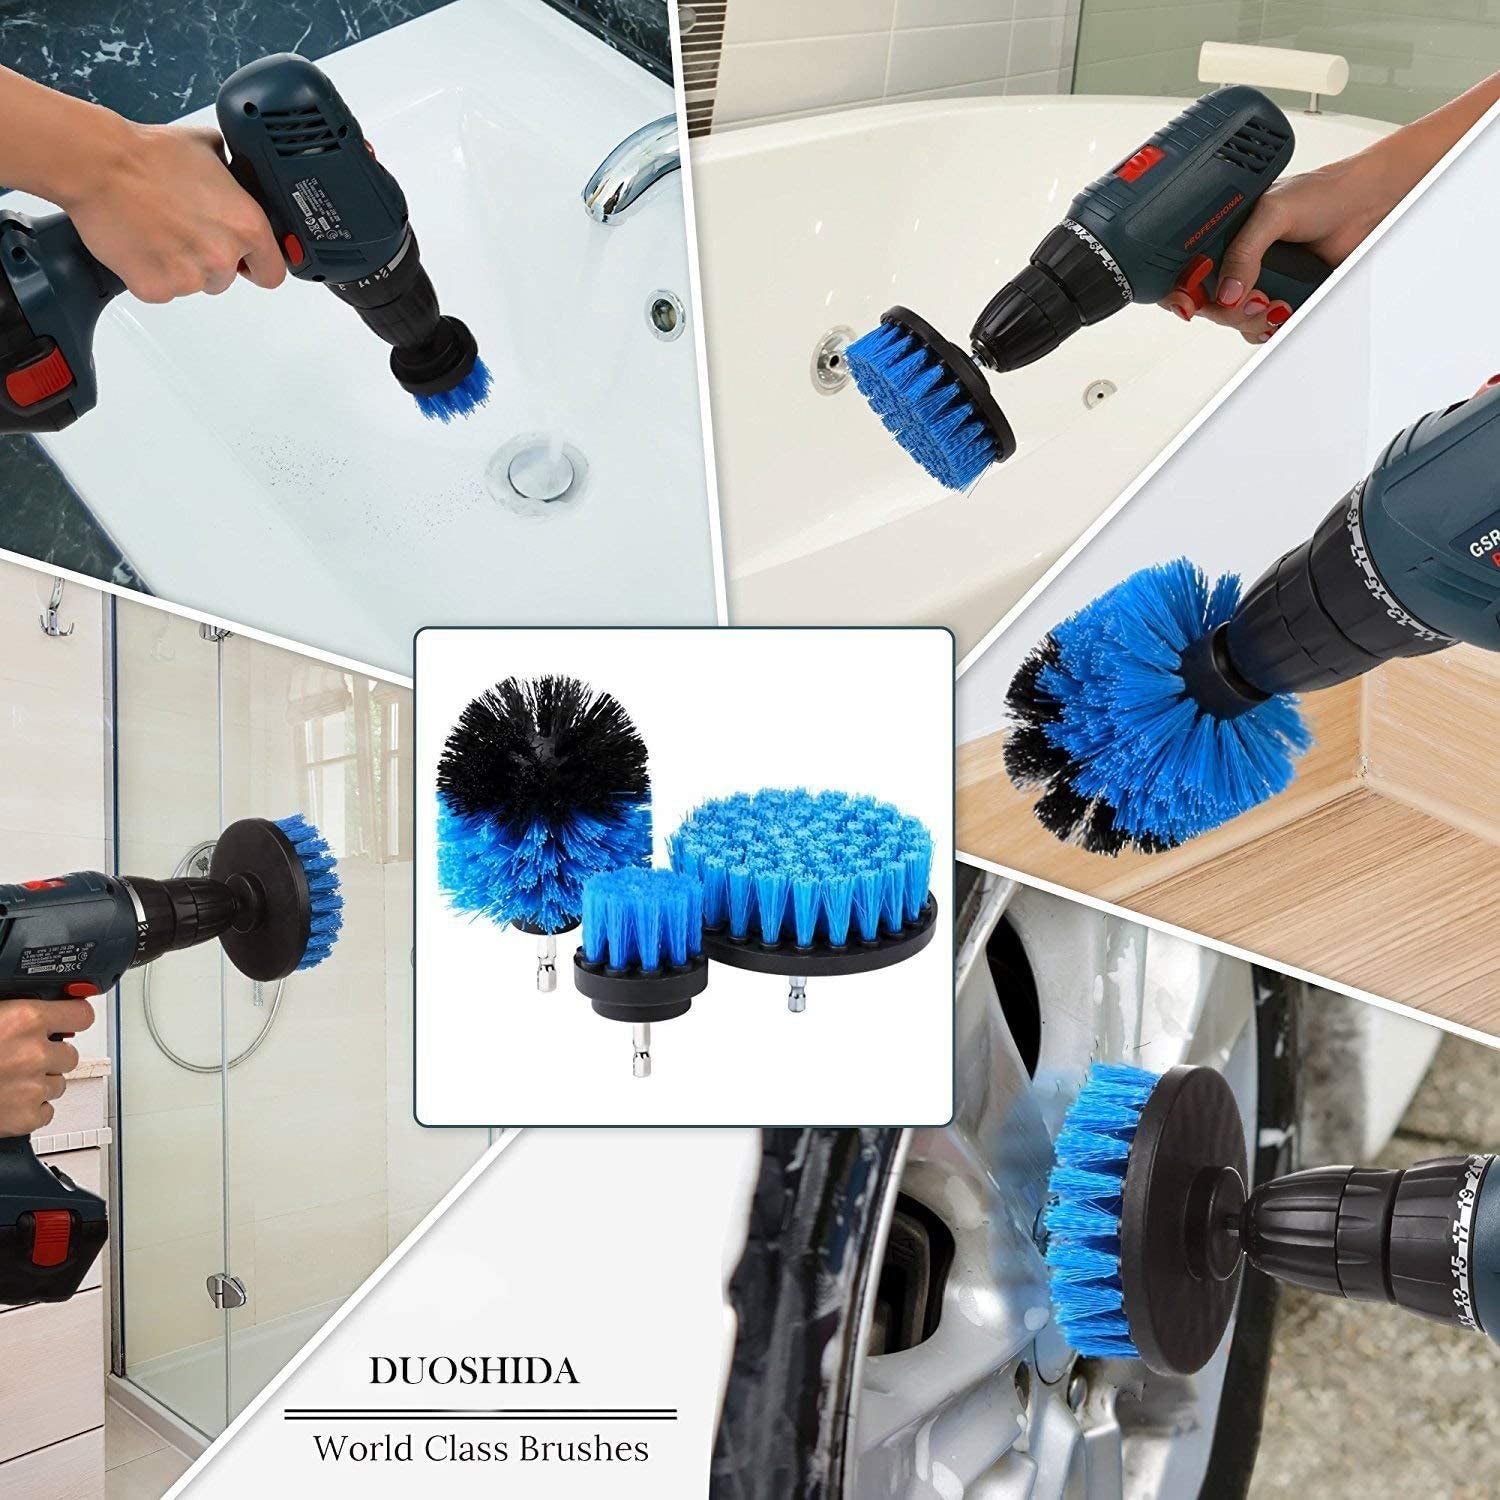 Drill Brush Power Scrubber Cleaning Set, 15 Piece Cleaner Scrubbing Brushes Attachments for Home Kitchen, Bathroom Surface, Carpet, Grout, Tile, Tub, Shower, Kitchen, Auto, Indoor